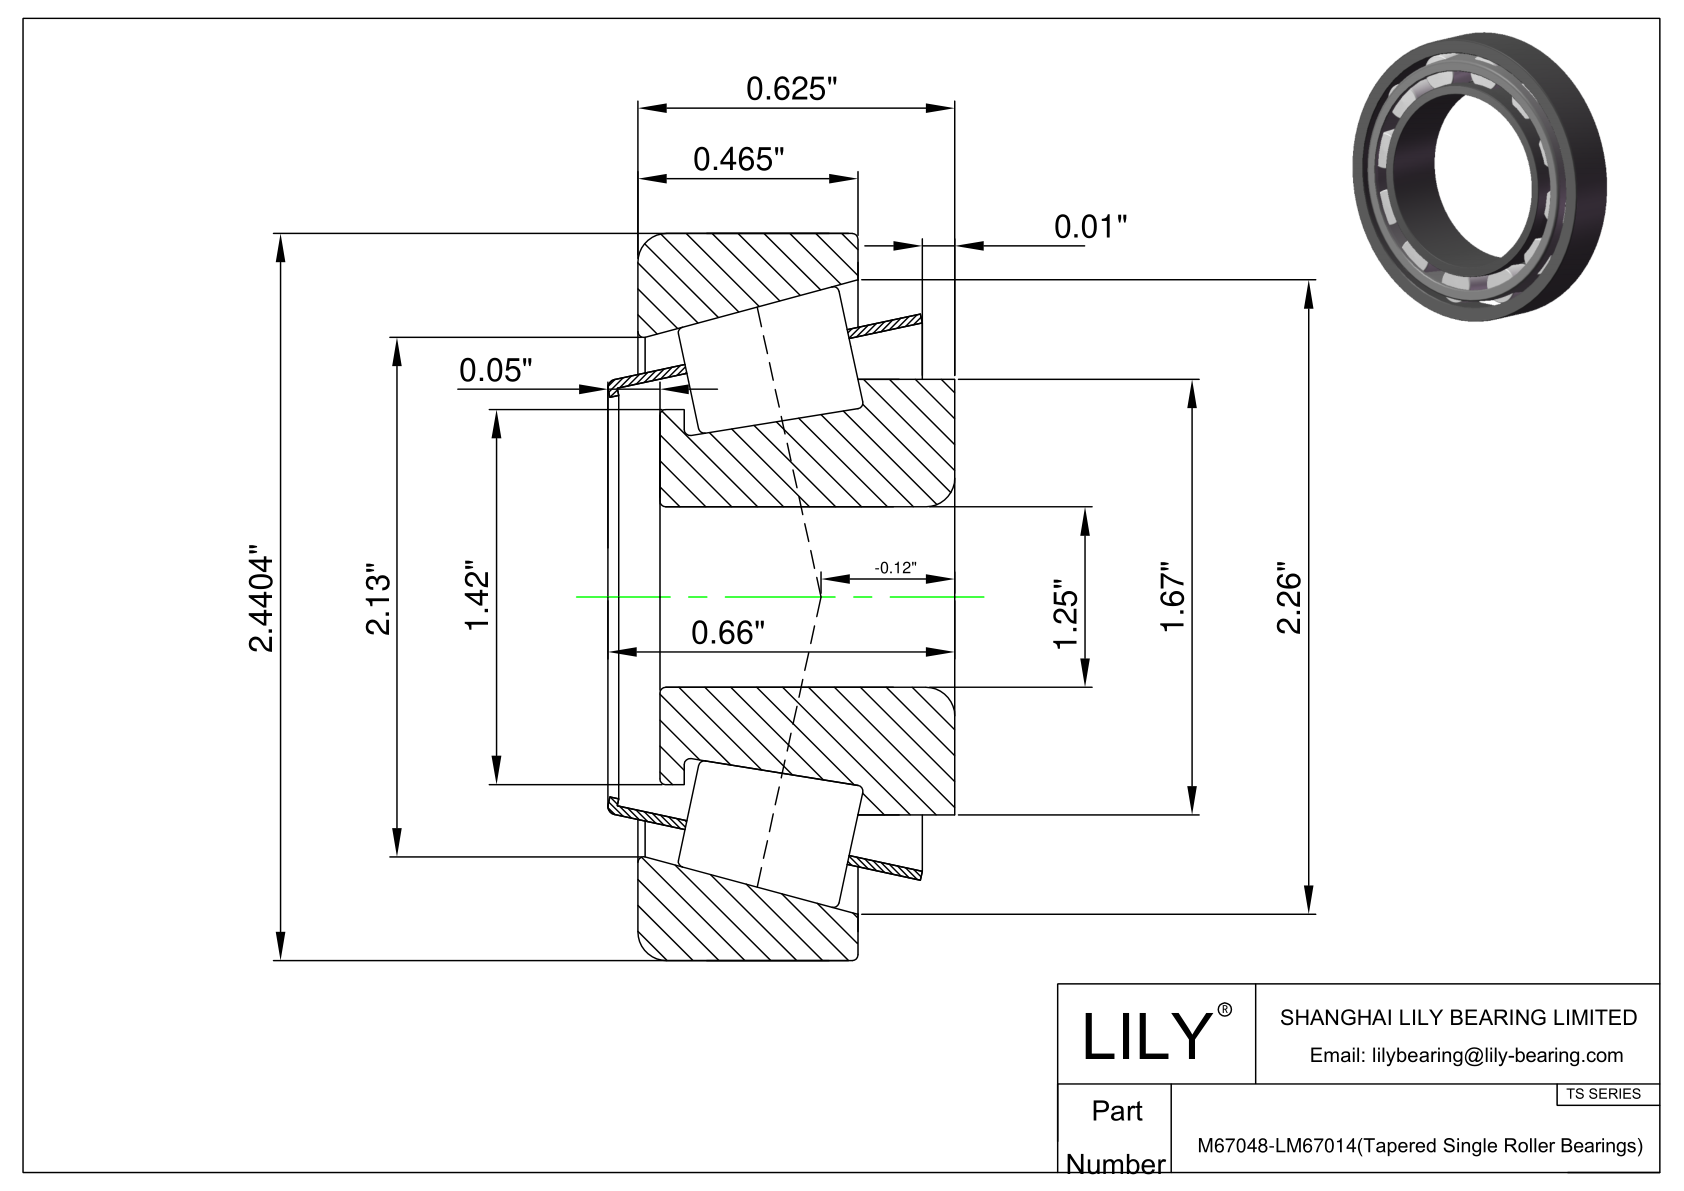 LM67048-LM67014 TS (Tapered Single Roller Bearings) (Imperial) cad drawing